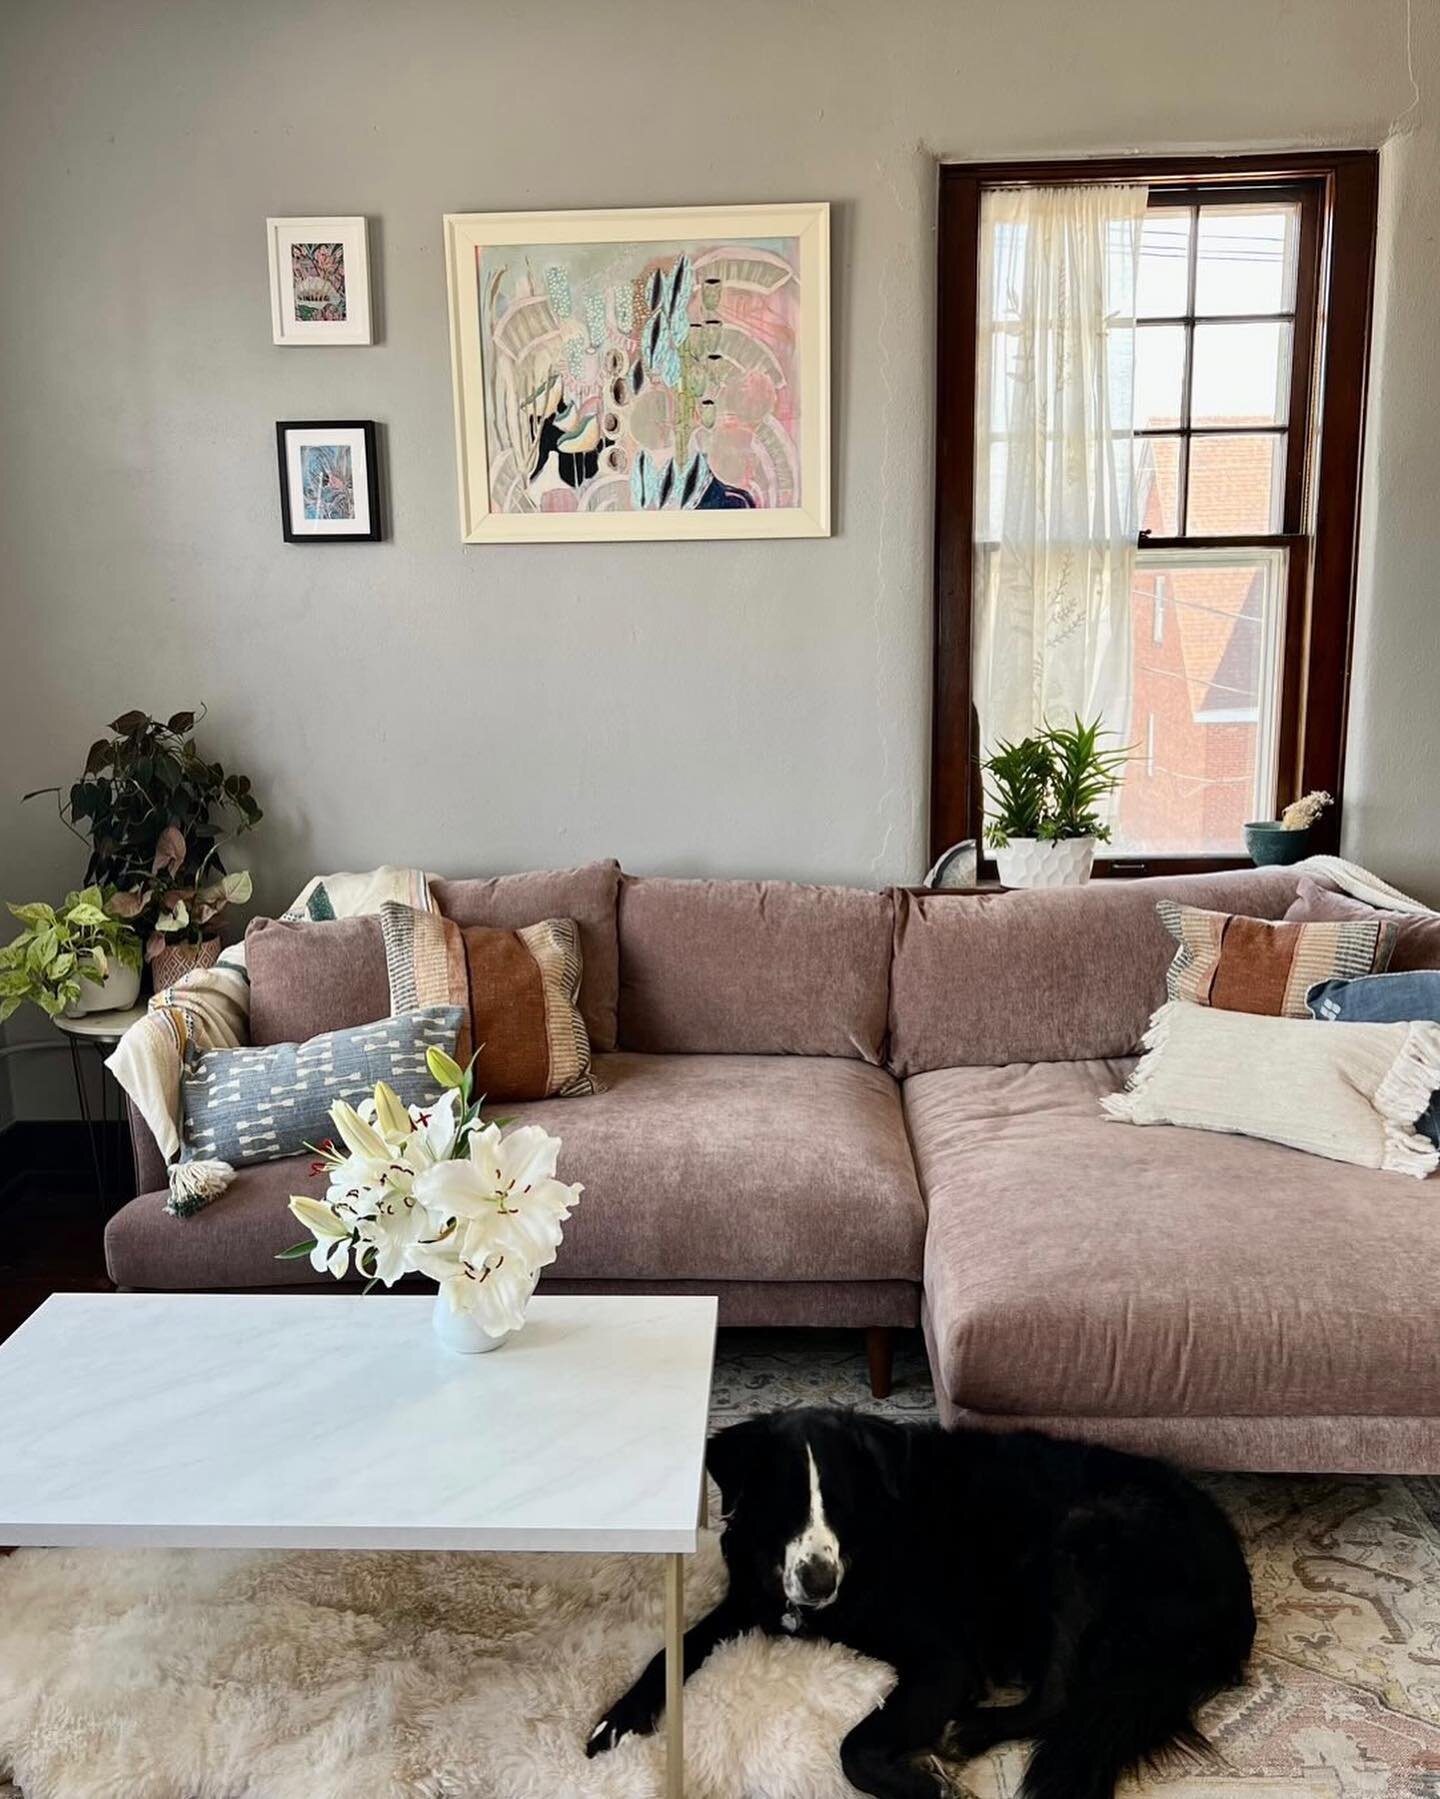 Always so happy to see where my art ends up. Paintings and I tend to bond and goodbyes are hard. 😂 Thanks Emily for sharing your beautiful home!